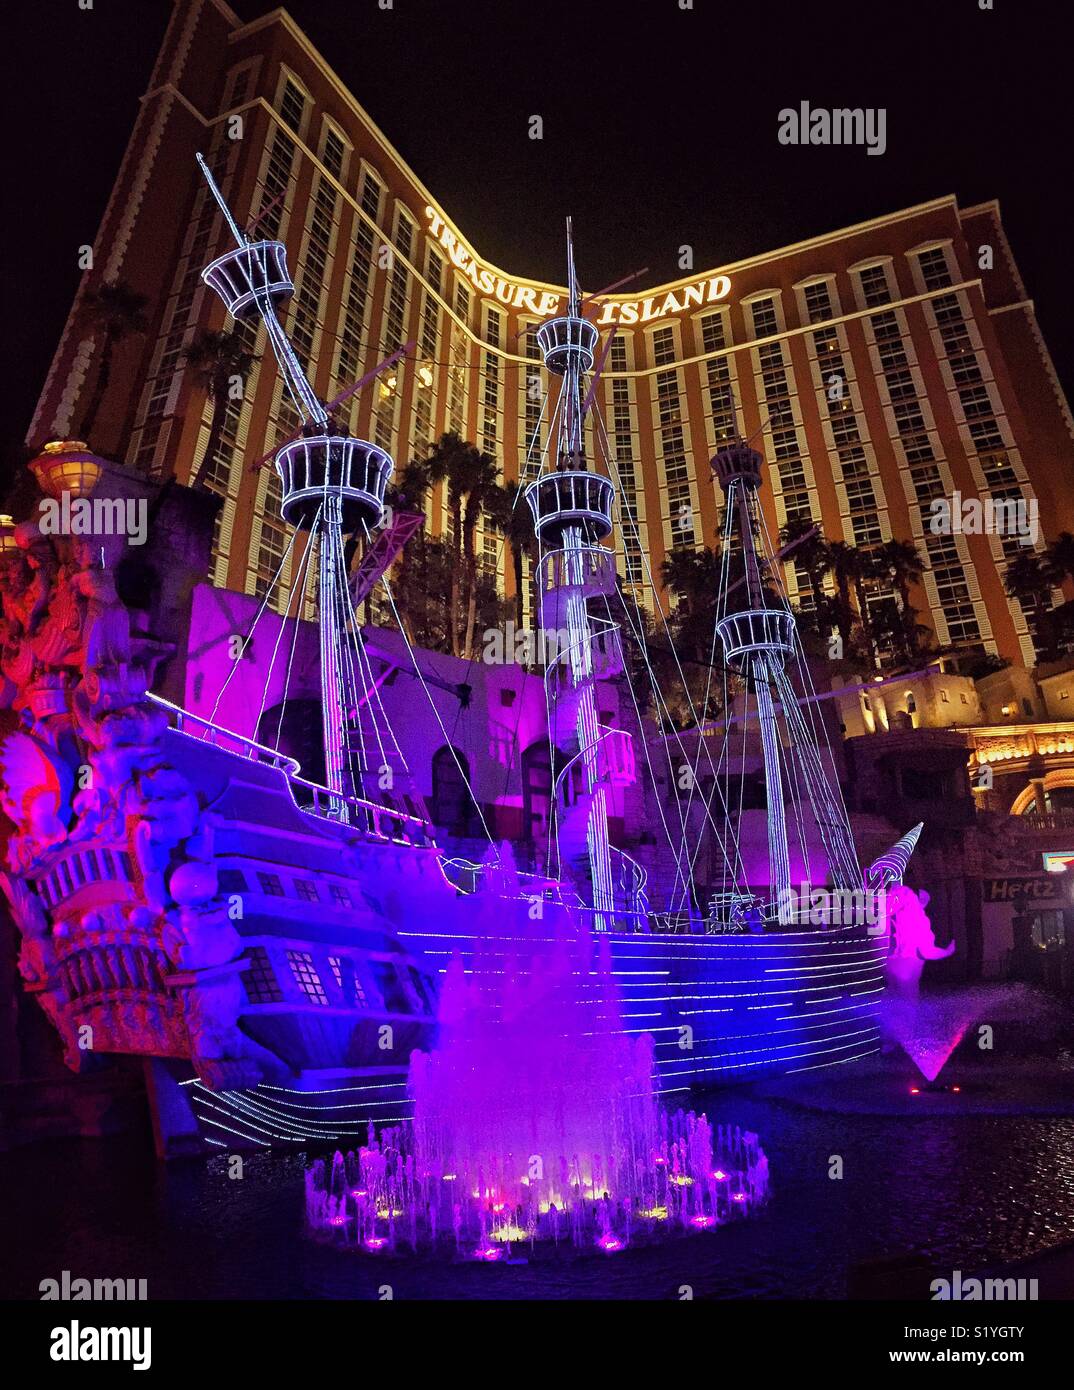 Pirate ship in front of Treasure Island hotel at night lit with neon lights in Las Vegas Stock Photo